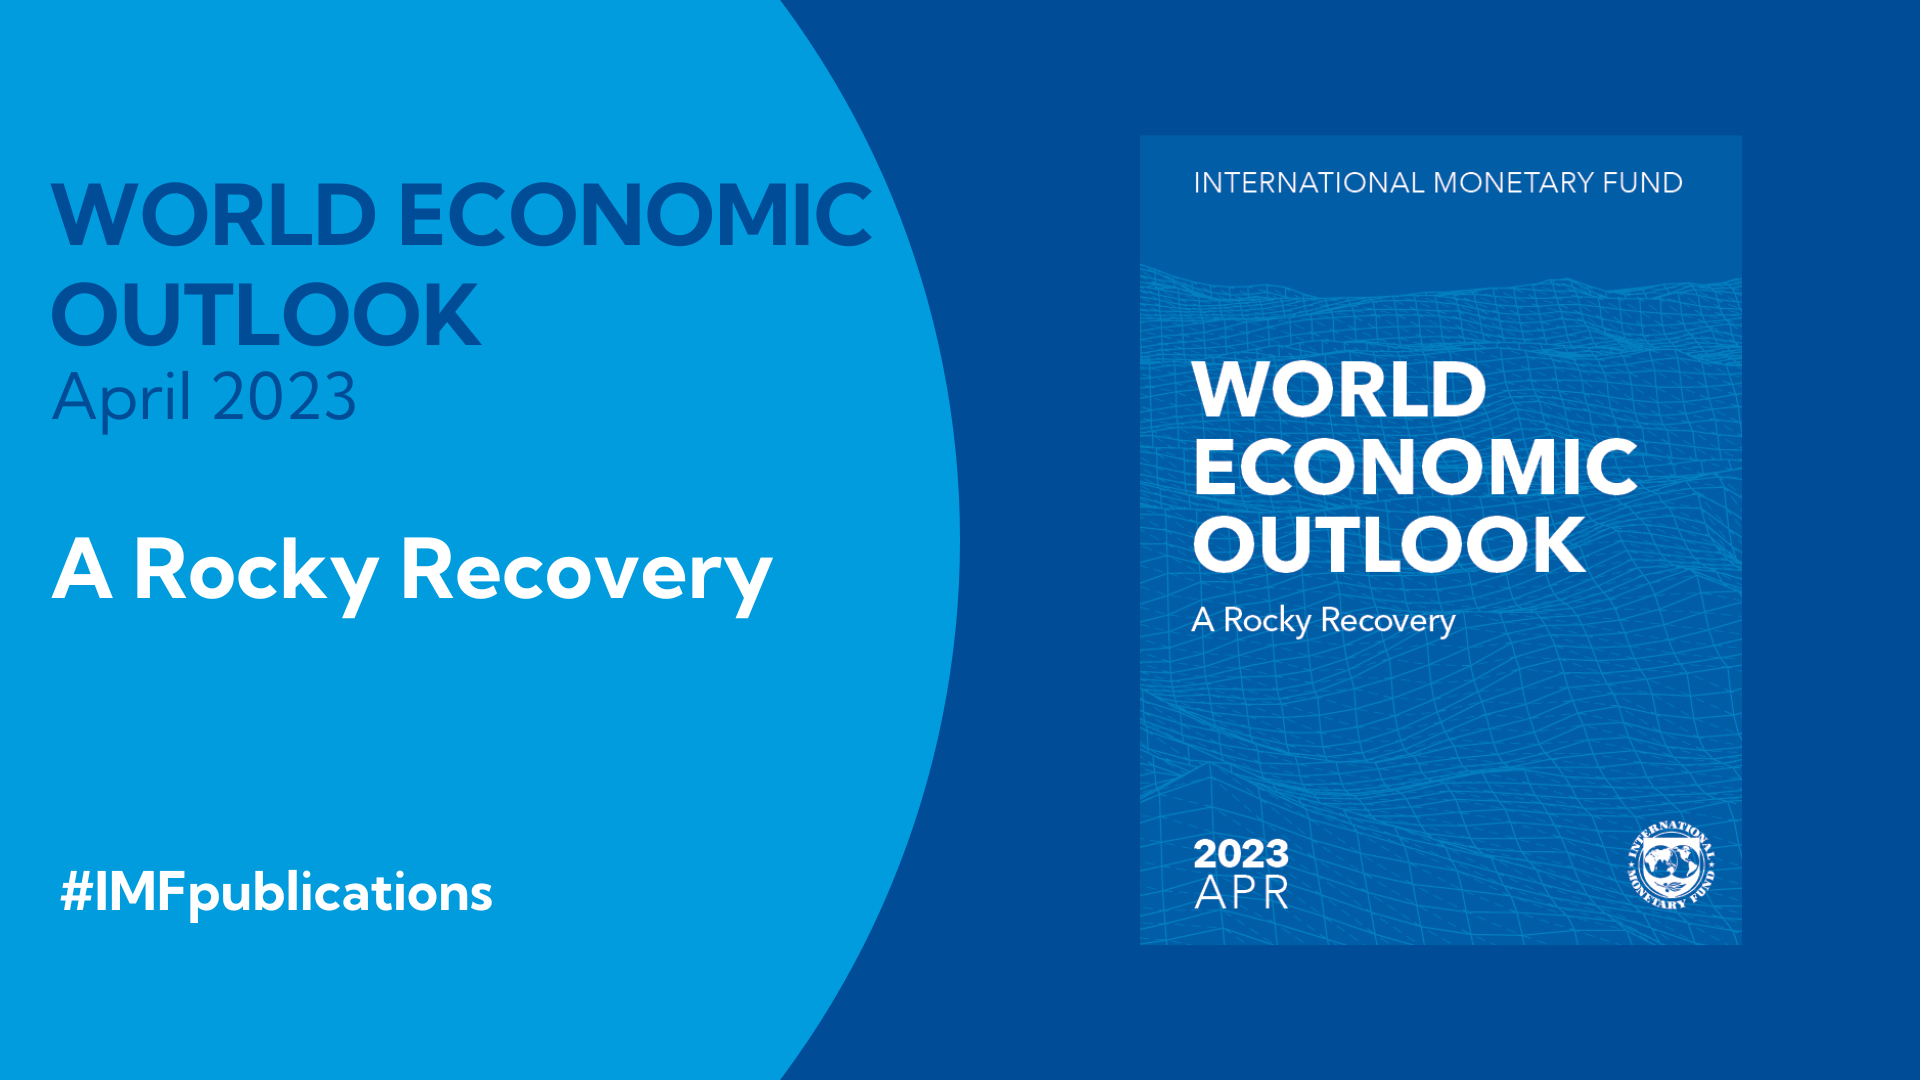 World Economic Outlook, April 2023 A Rocky Recovery